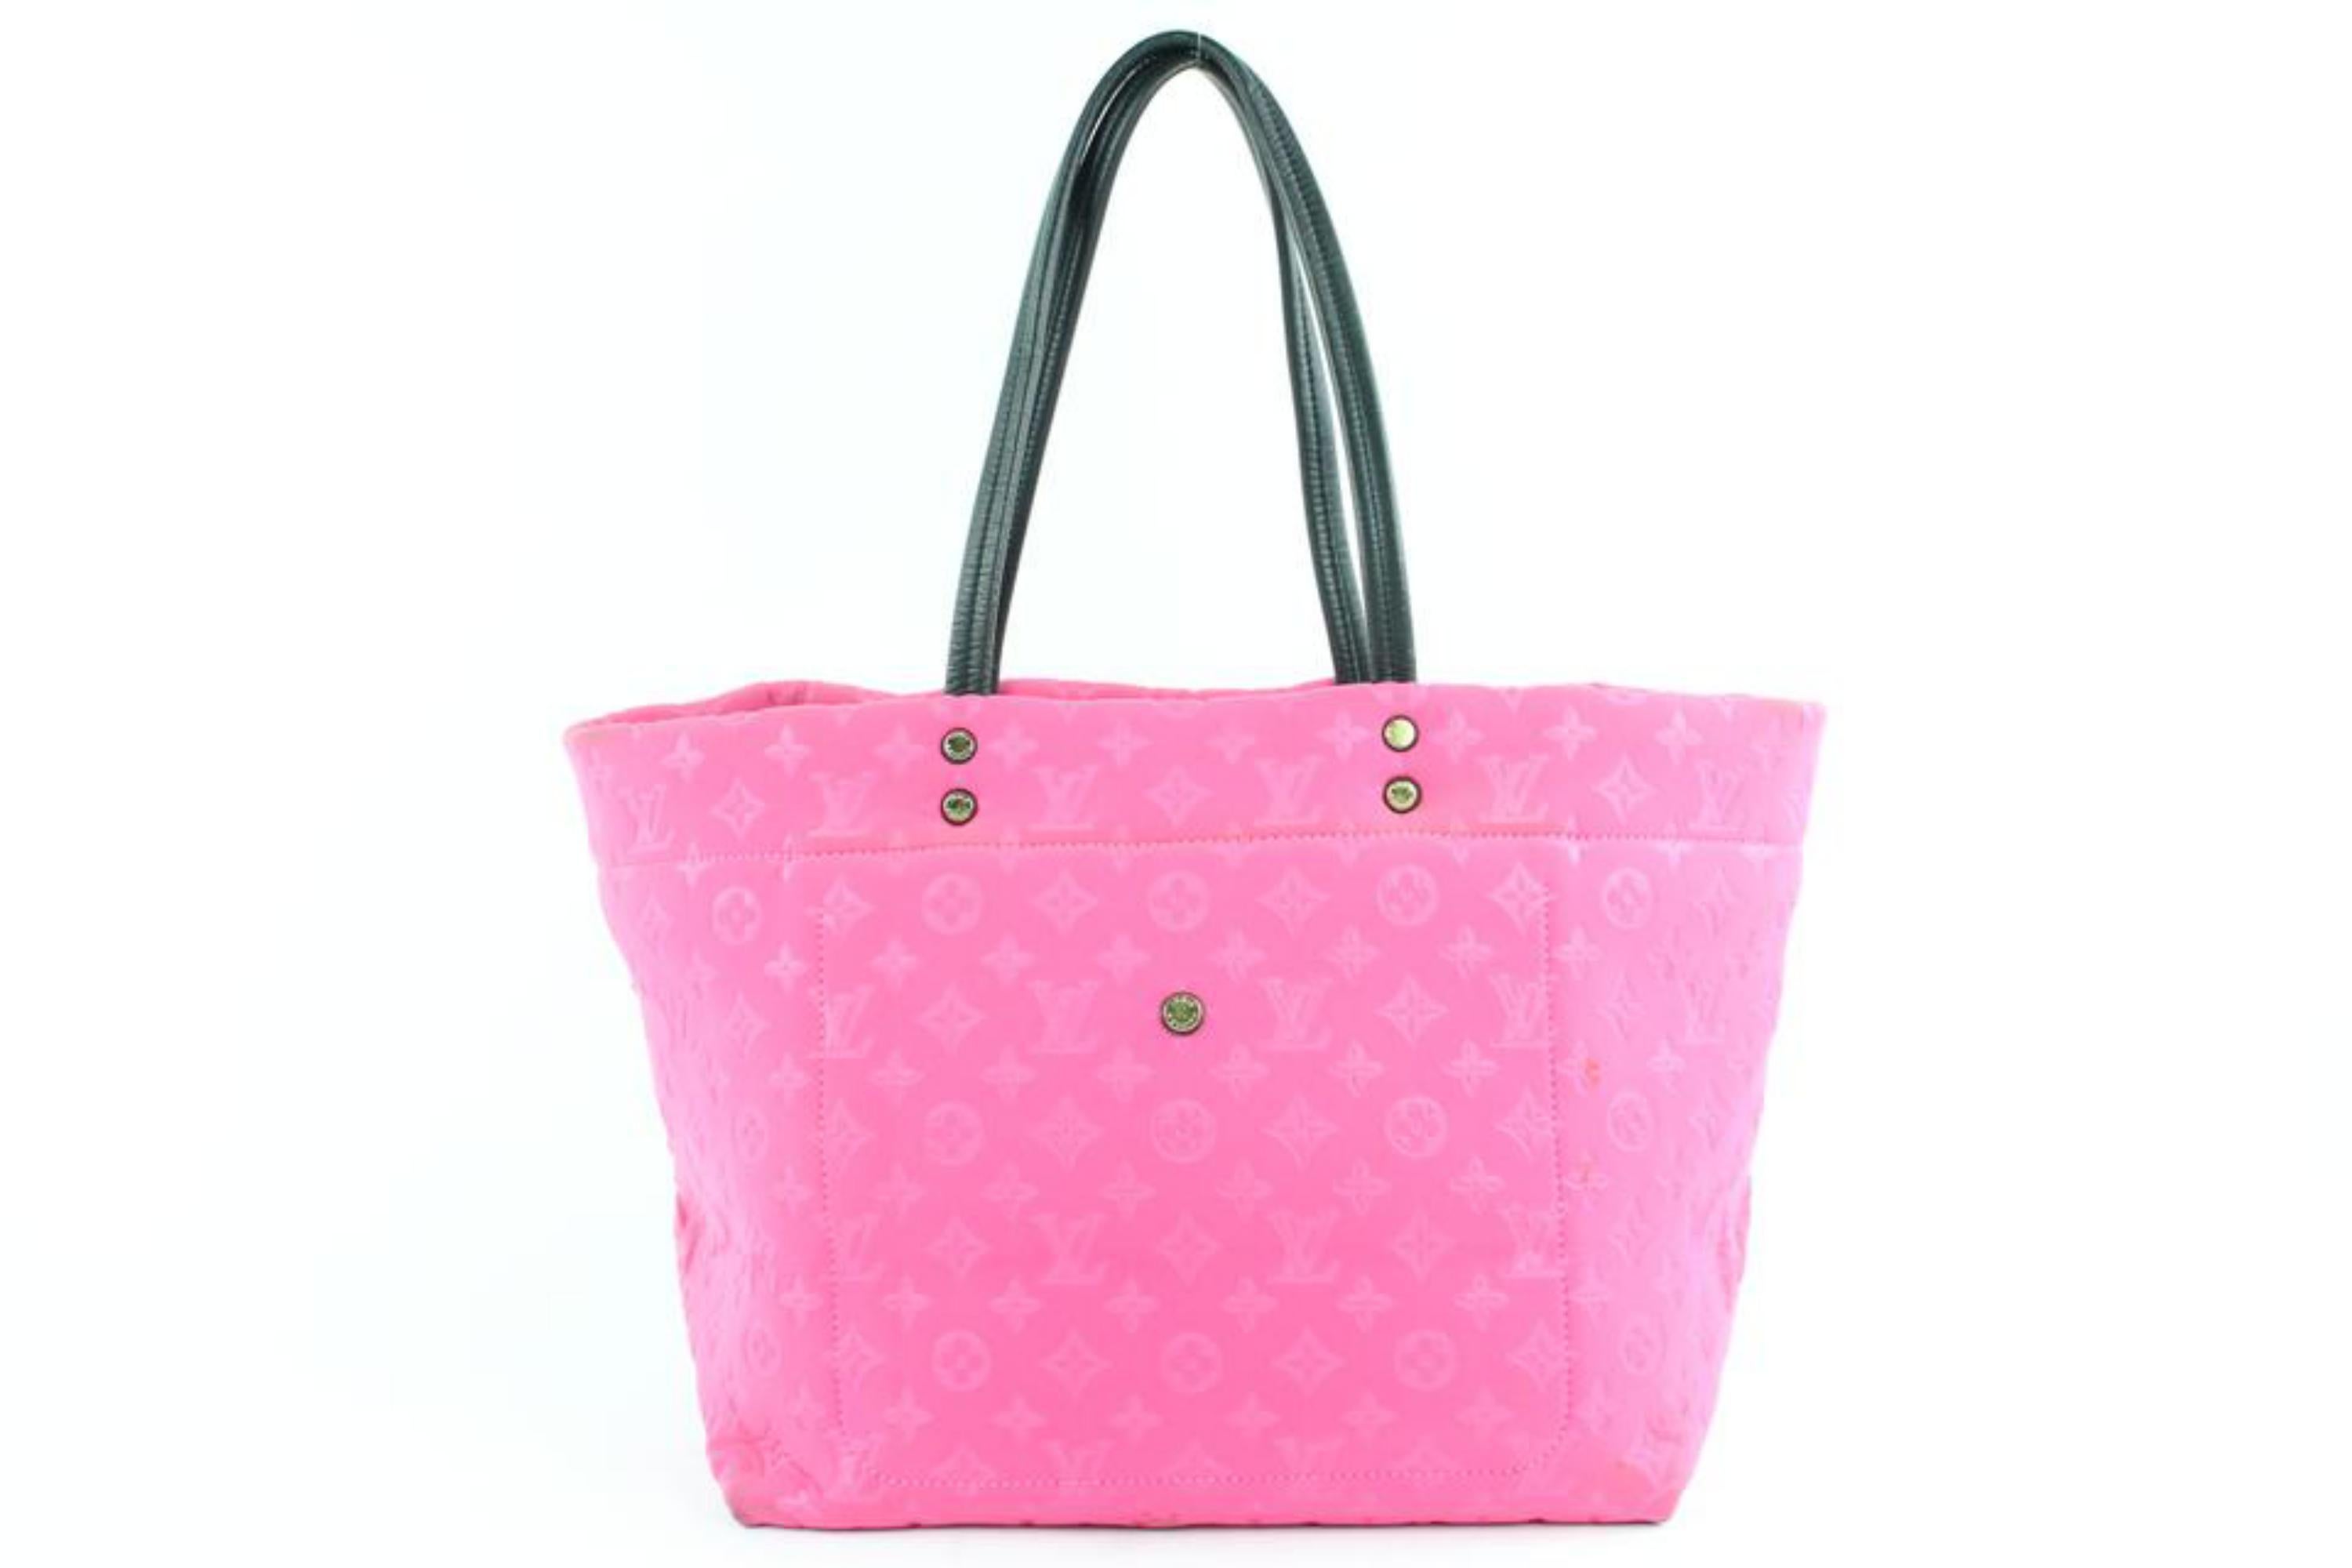 Louis Vuitton Neverfull Limited Edition Fuchsia Scubaneverfull Mm 16lz0114 Tote For Sale 5